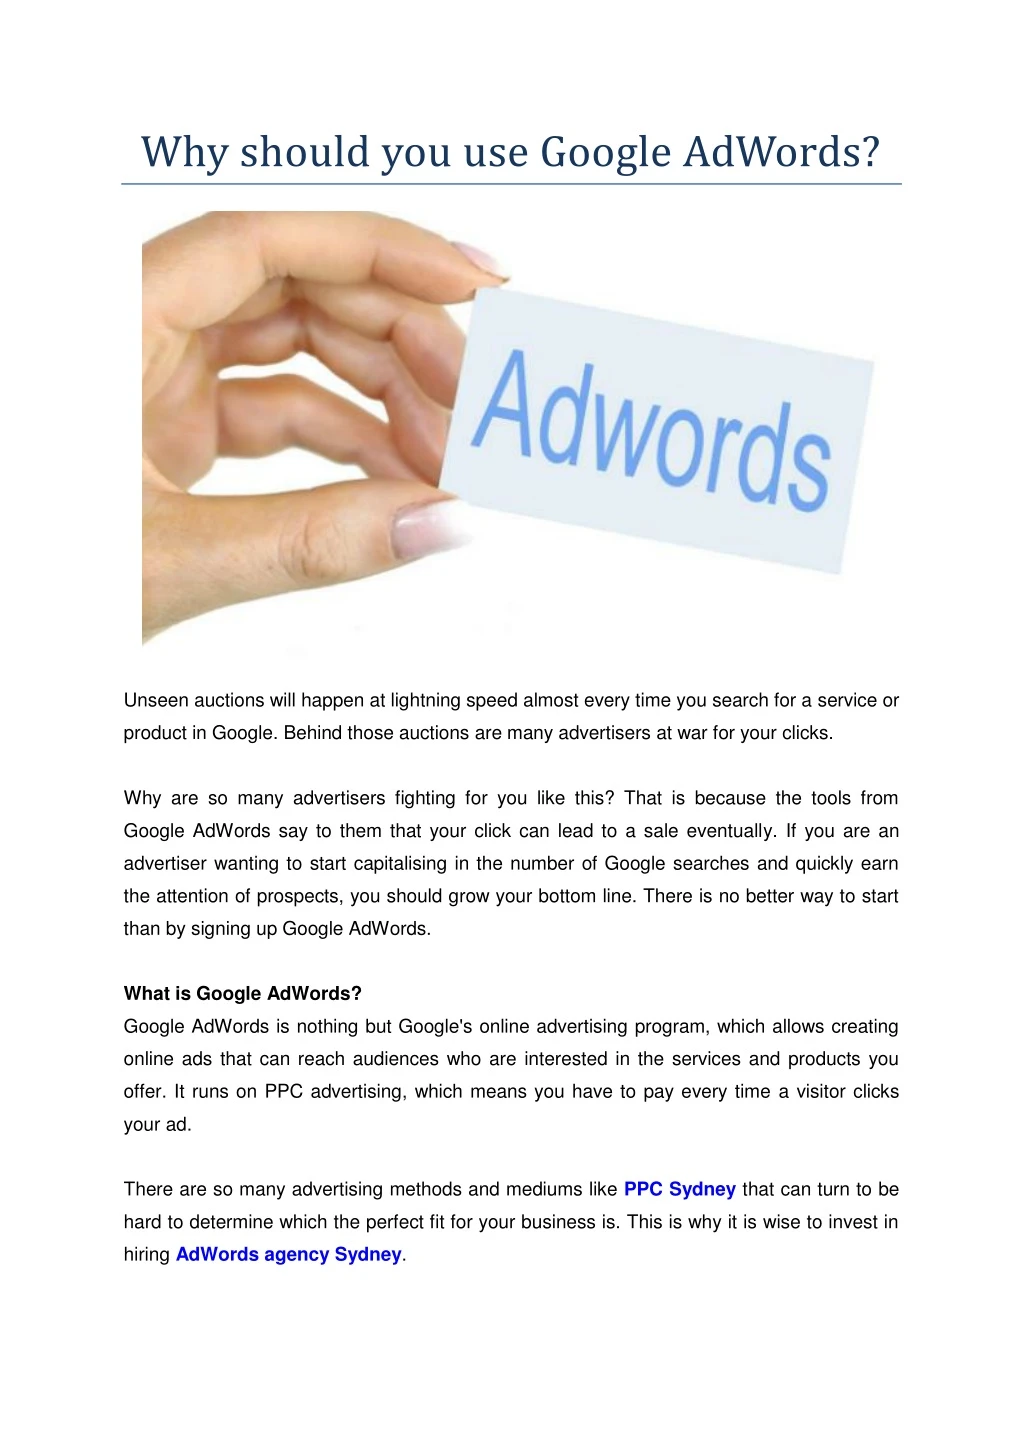 why should you use google adwords